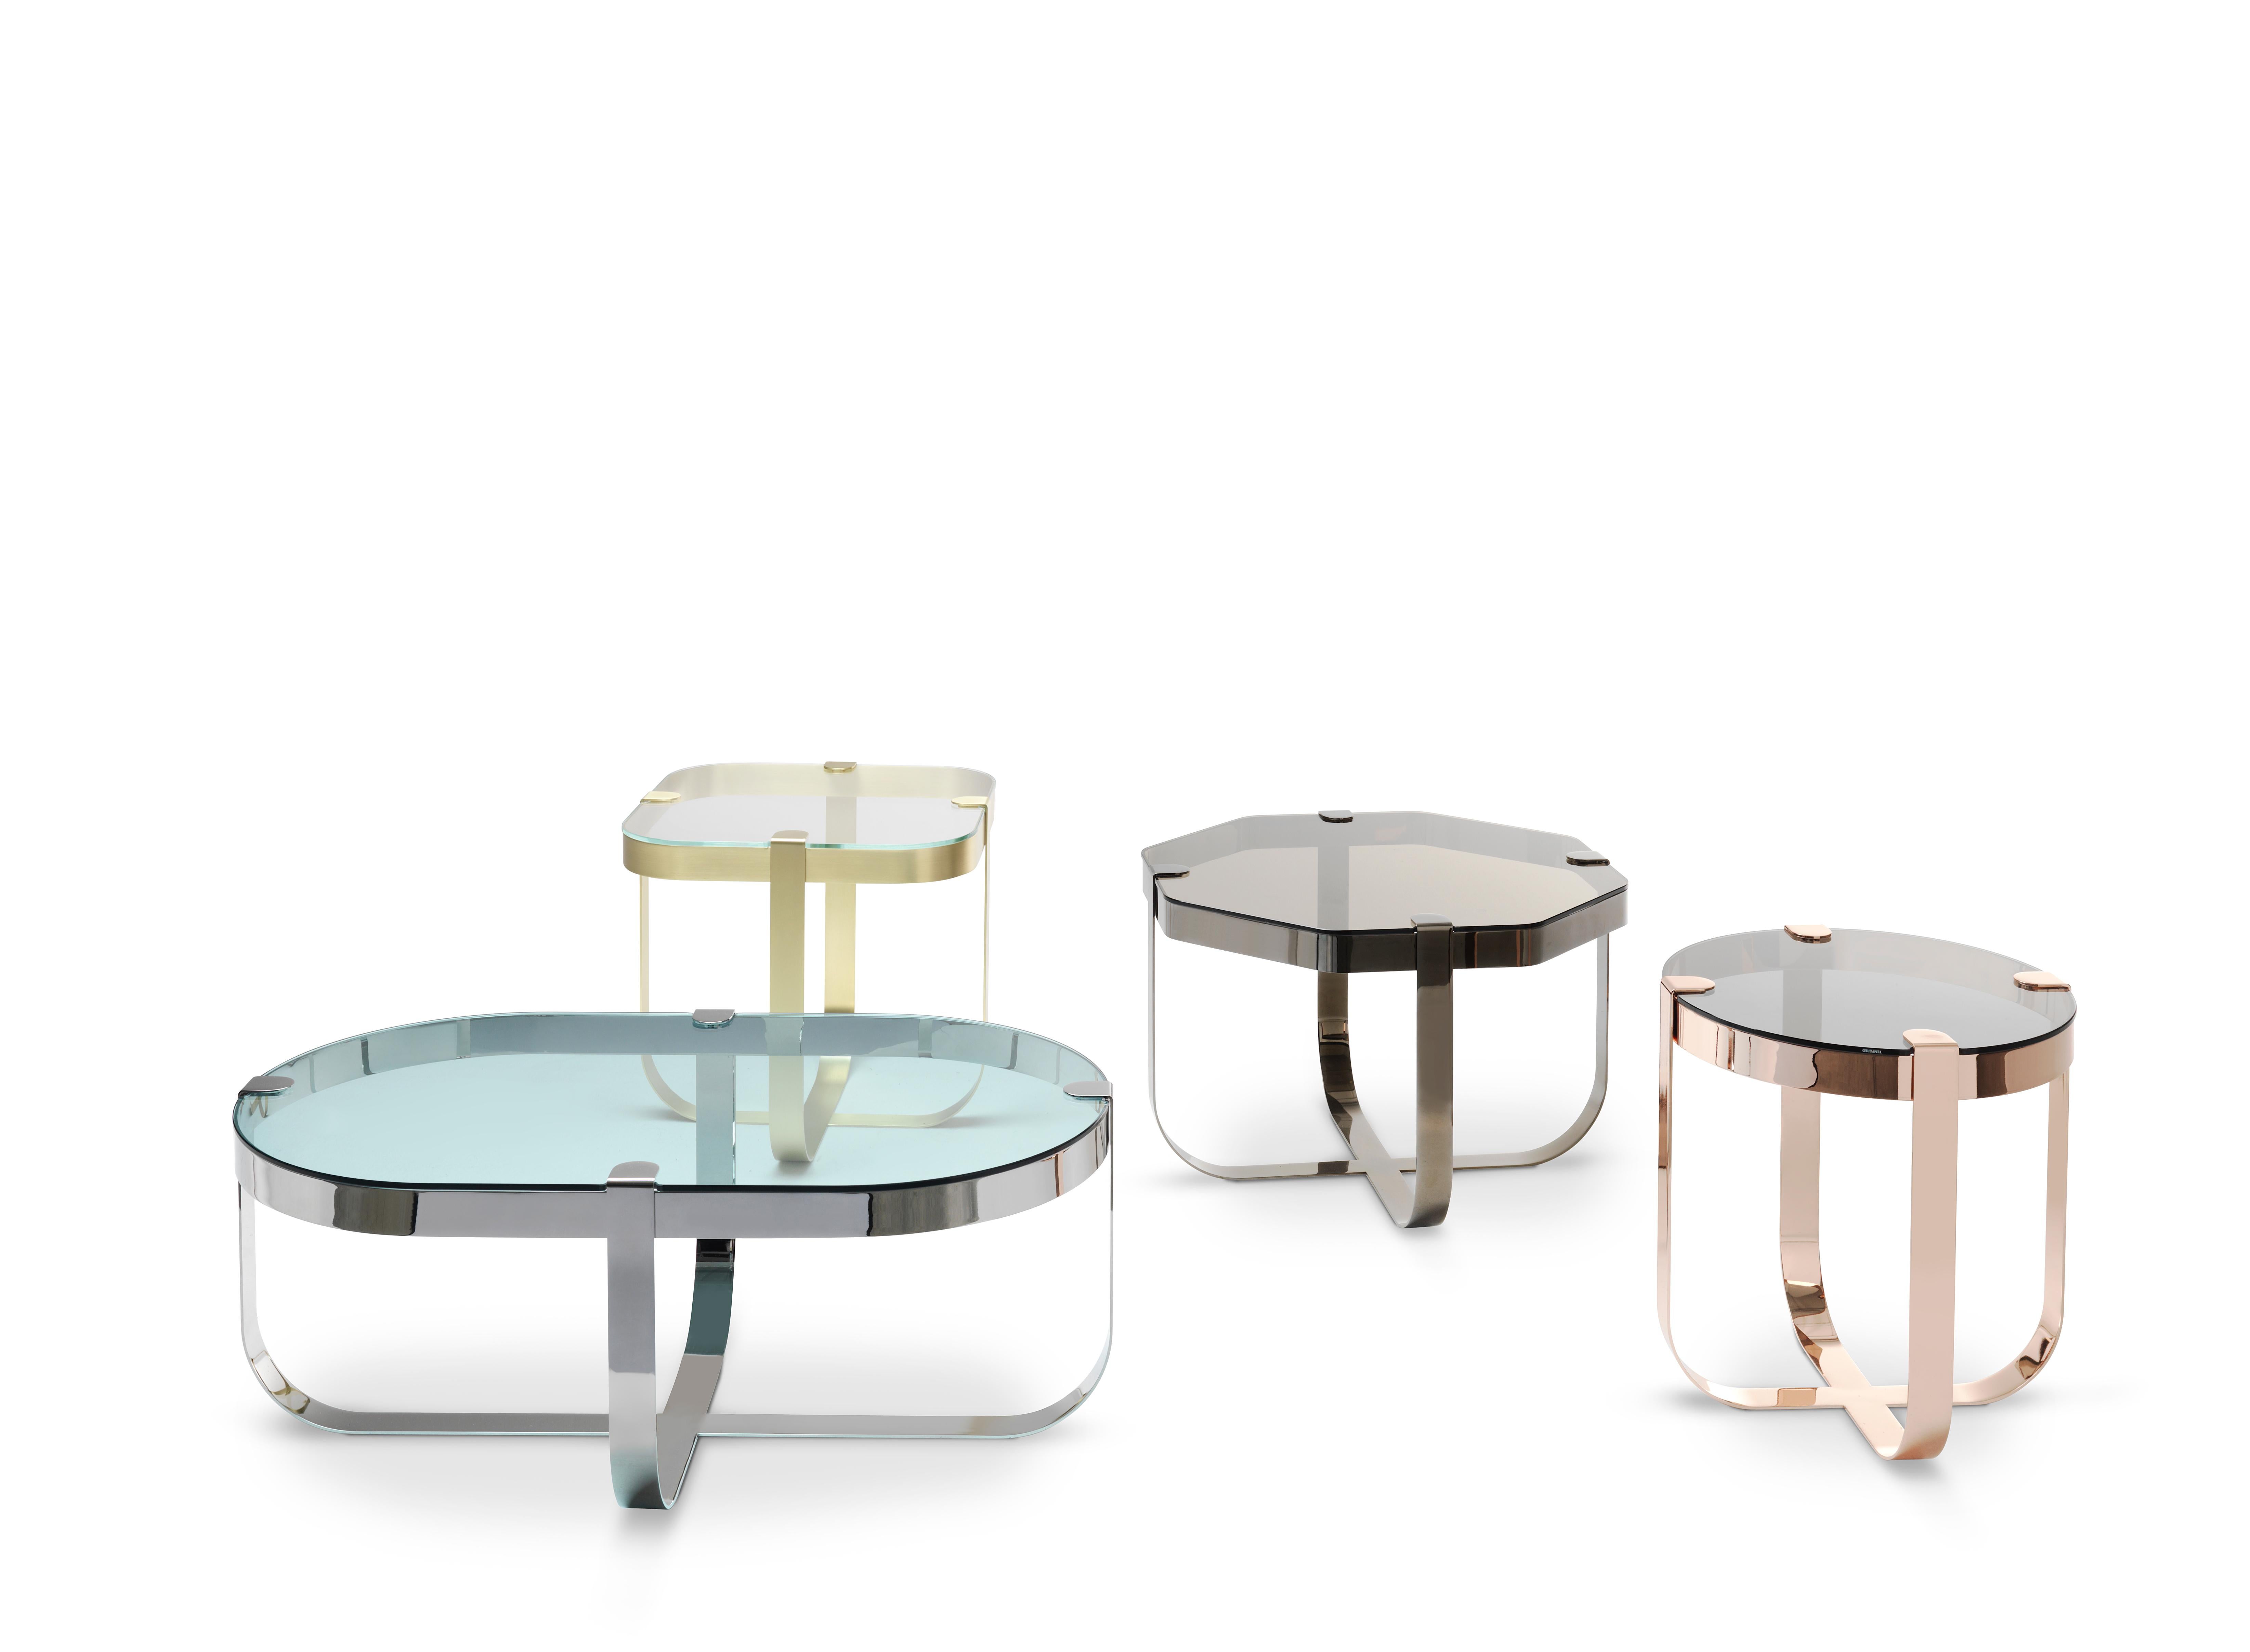 Elegant like jewellery, the Ring coffee tables are inspired by raw cuts of precious stones prior to being mounted into rings. The choice of materials is aimed to emphasise this inspiration behind the collection. The metal base structures are